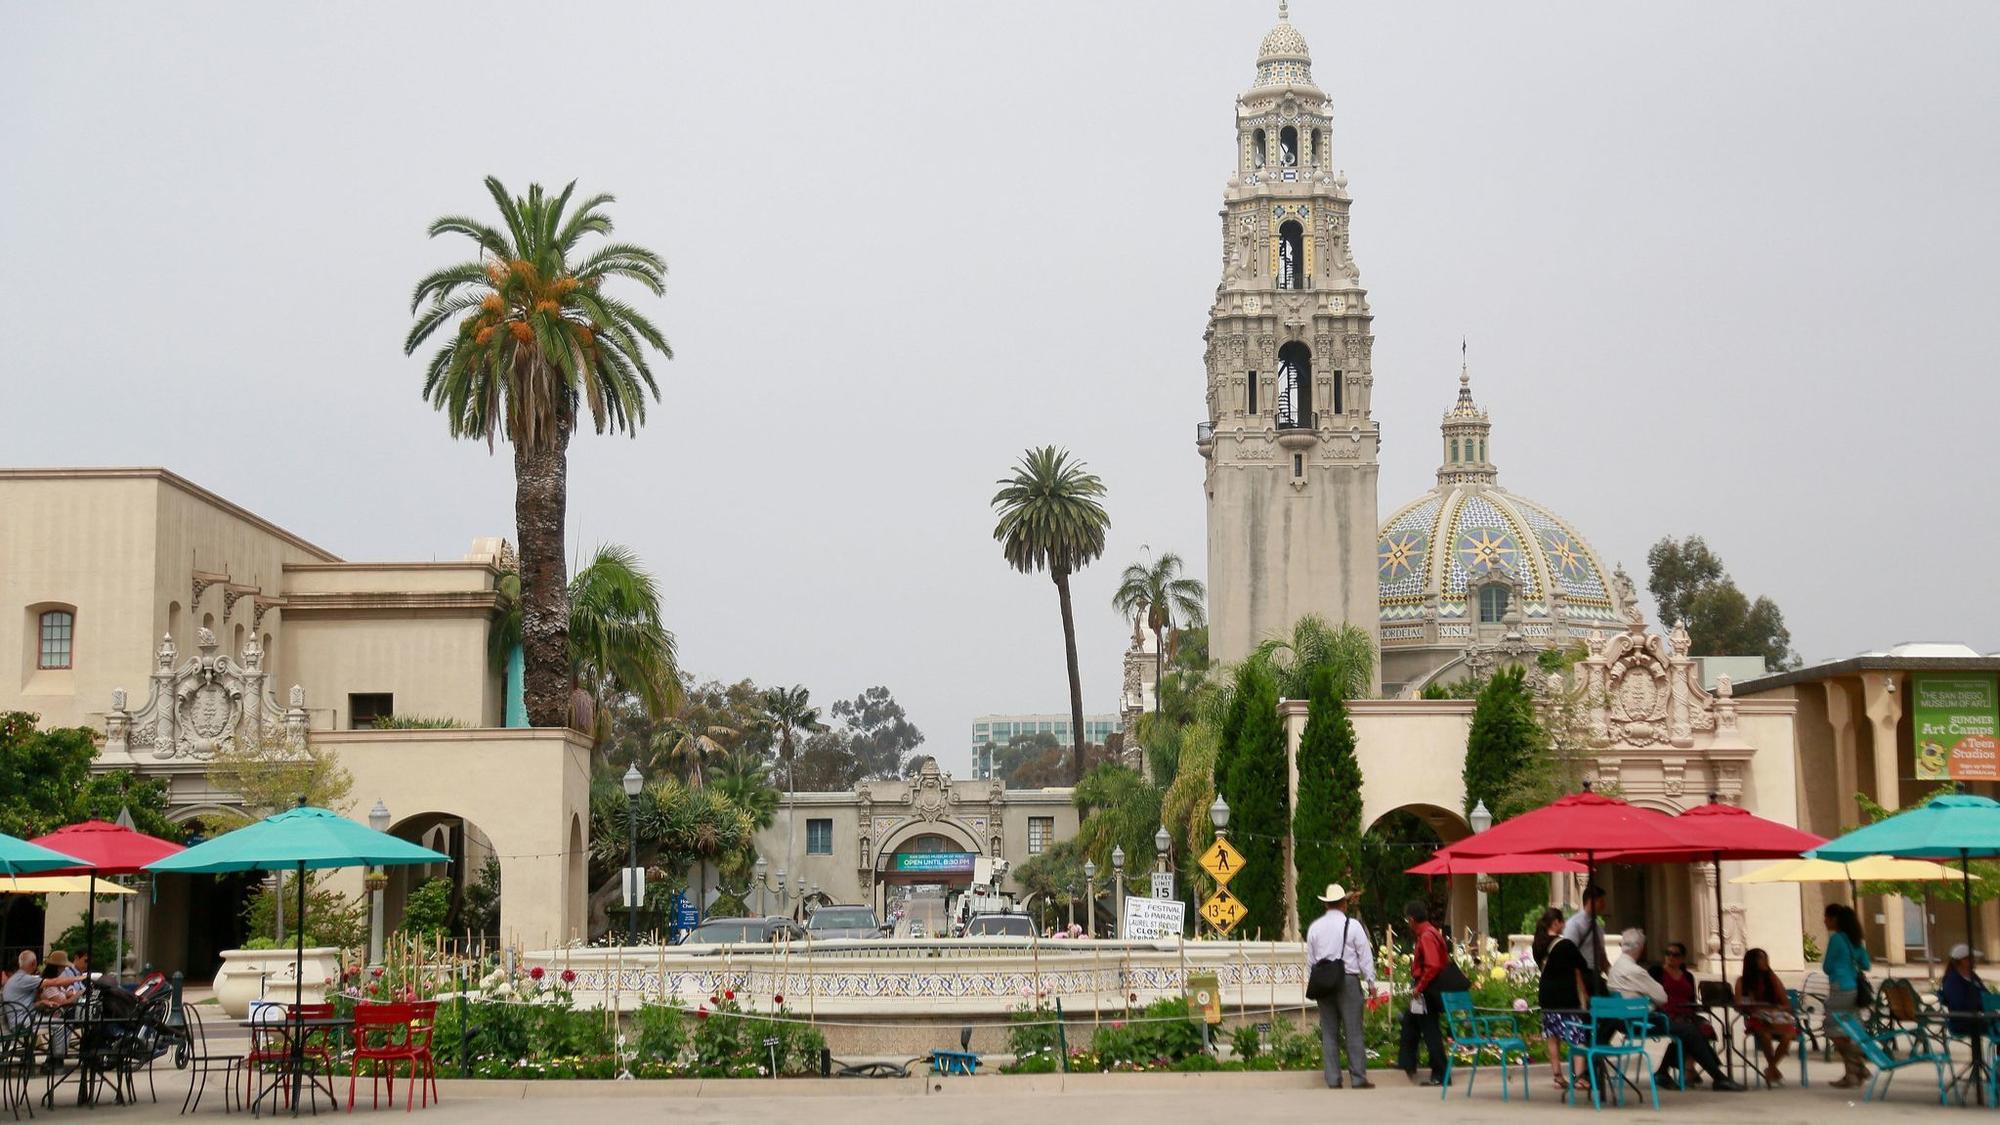 The Plaza de Panama project is said to remove traffic from the historic heart of Balboa Park and increase parking while creating 6.3 acres of parkland, gardens and pedestrian fri